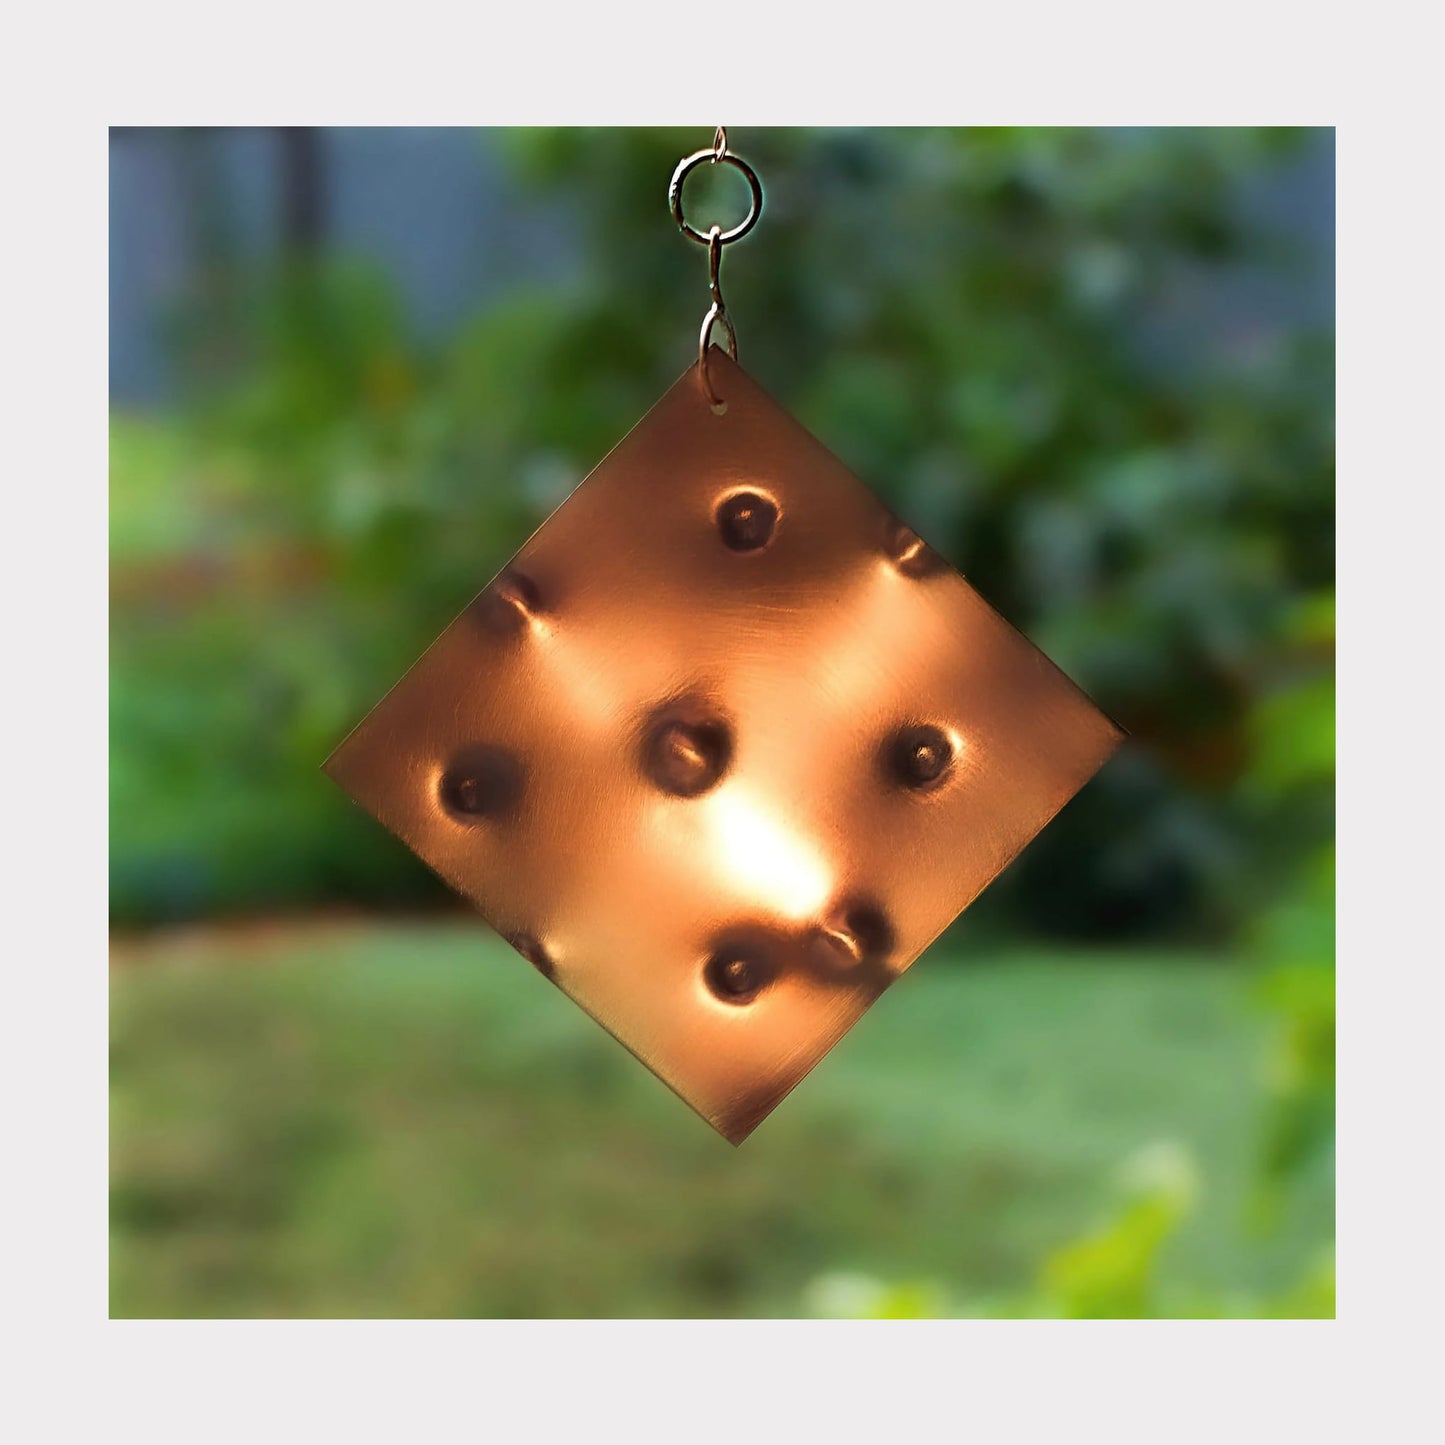 handmade hammered copper windsail for a wind chime